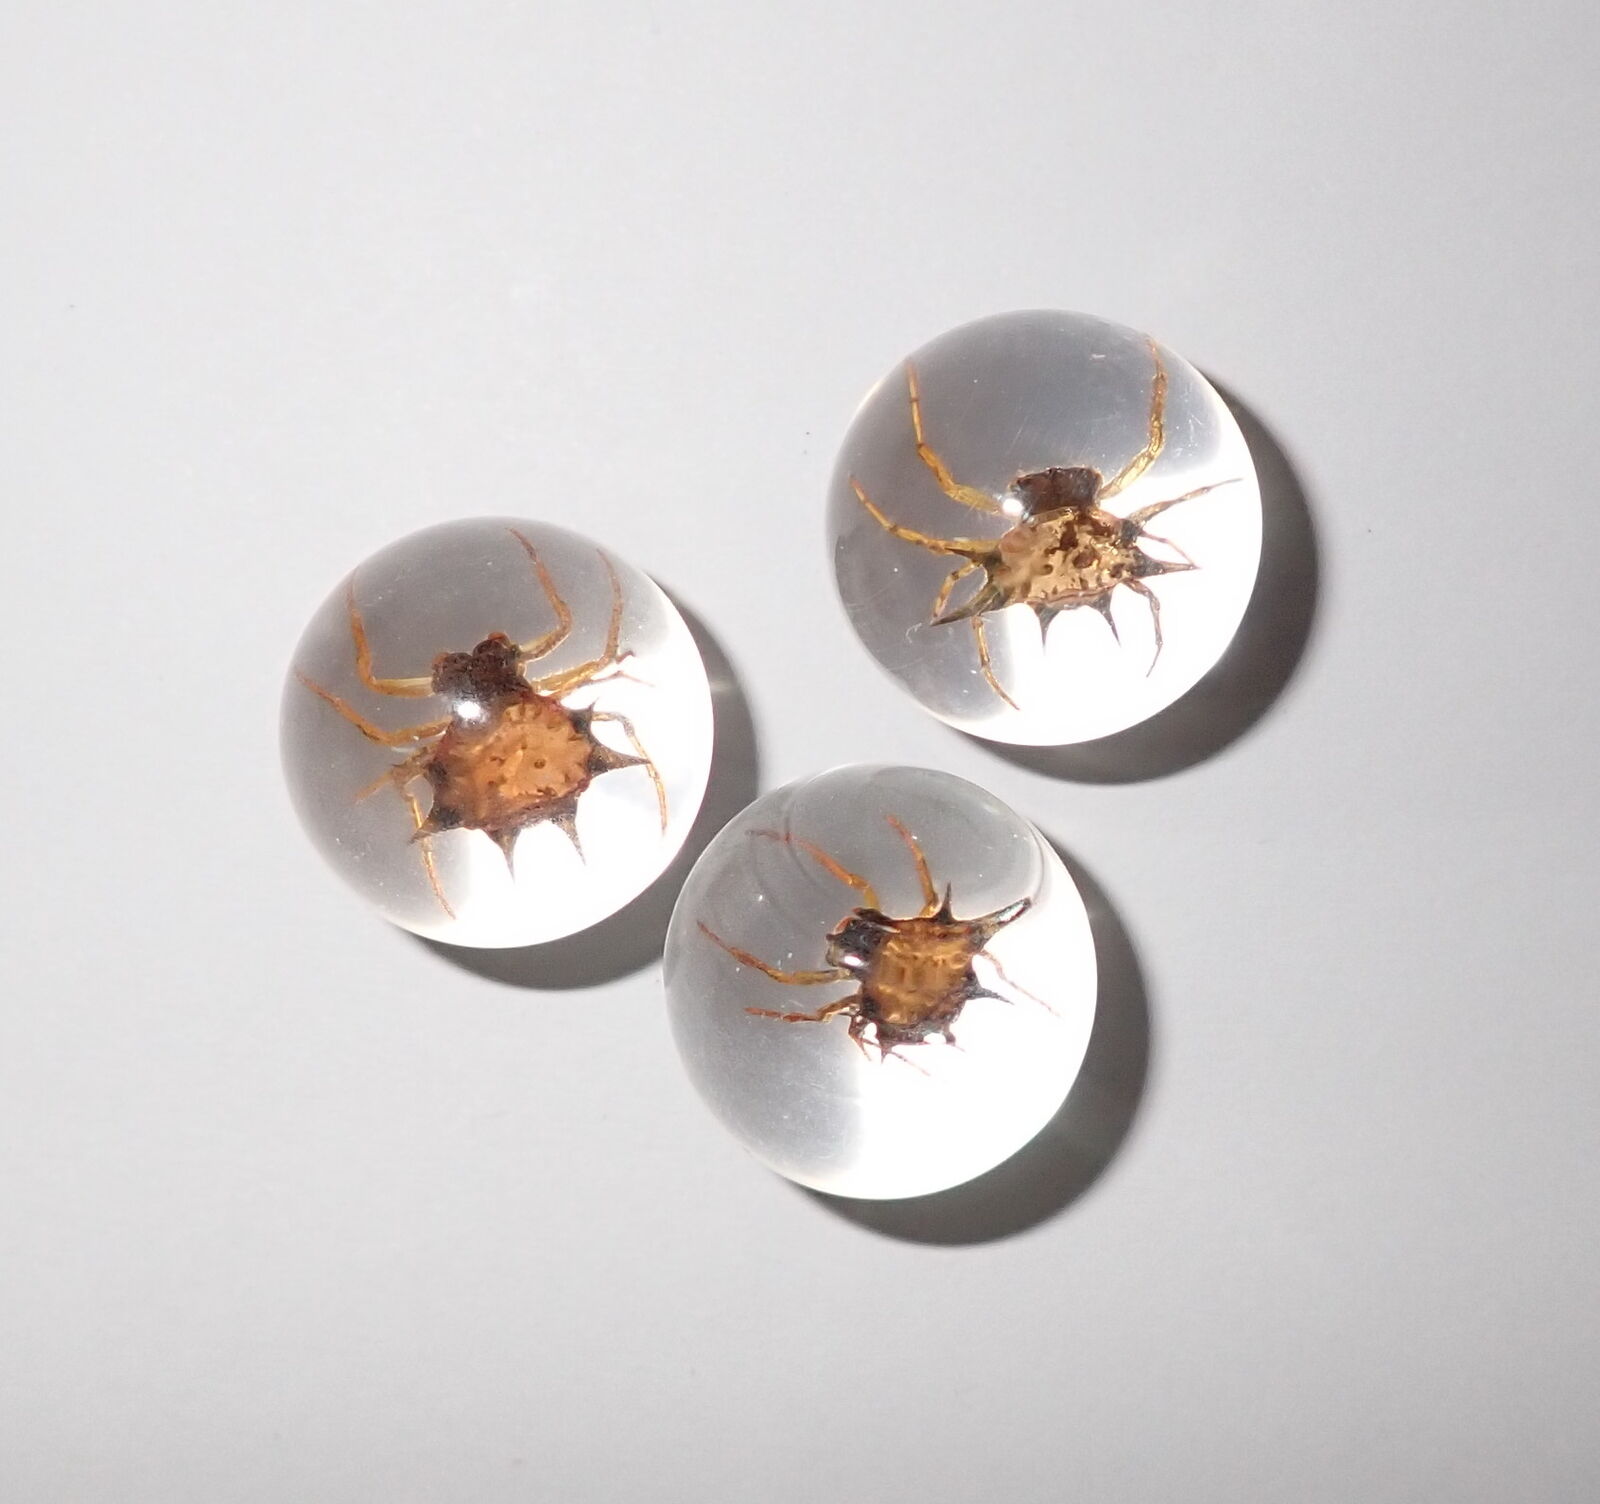 Spiny Spider Specimen 2 cm Clear Resin Marble Sphere  3 Pieces Lot